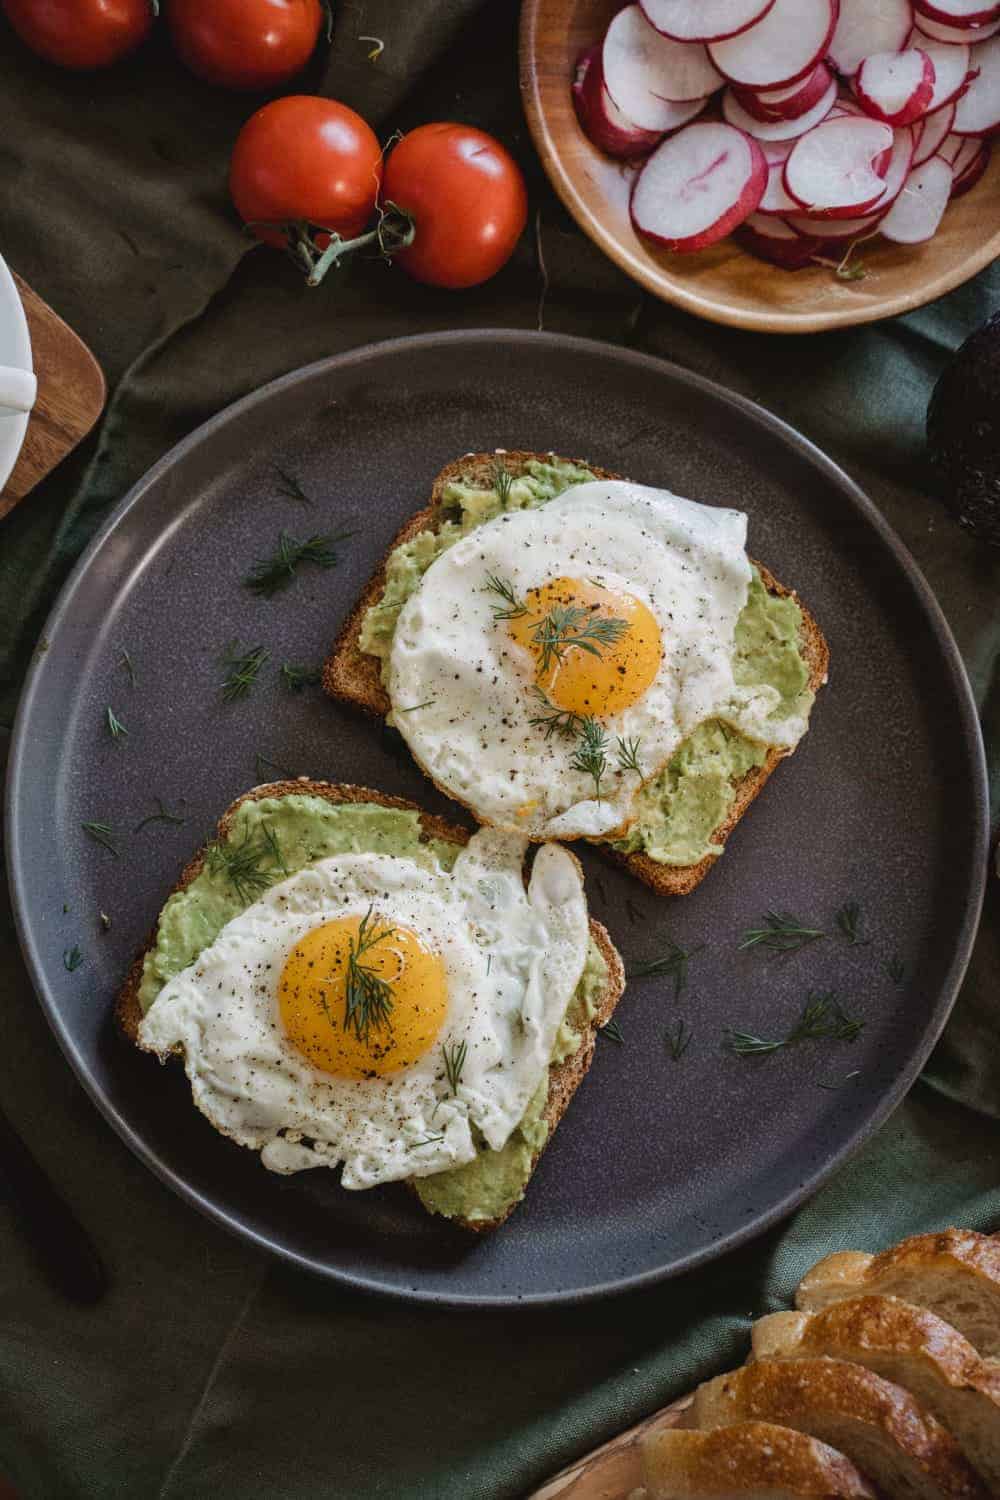 This amazing Pesto eggs plate is made with four main ingredients: pesto, eggs, bread, and seasoning, and topped with some basil leaves and chili flakes.